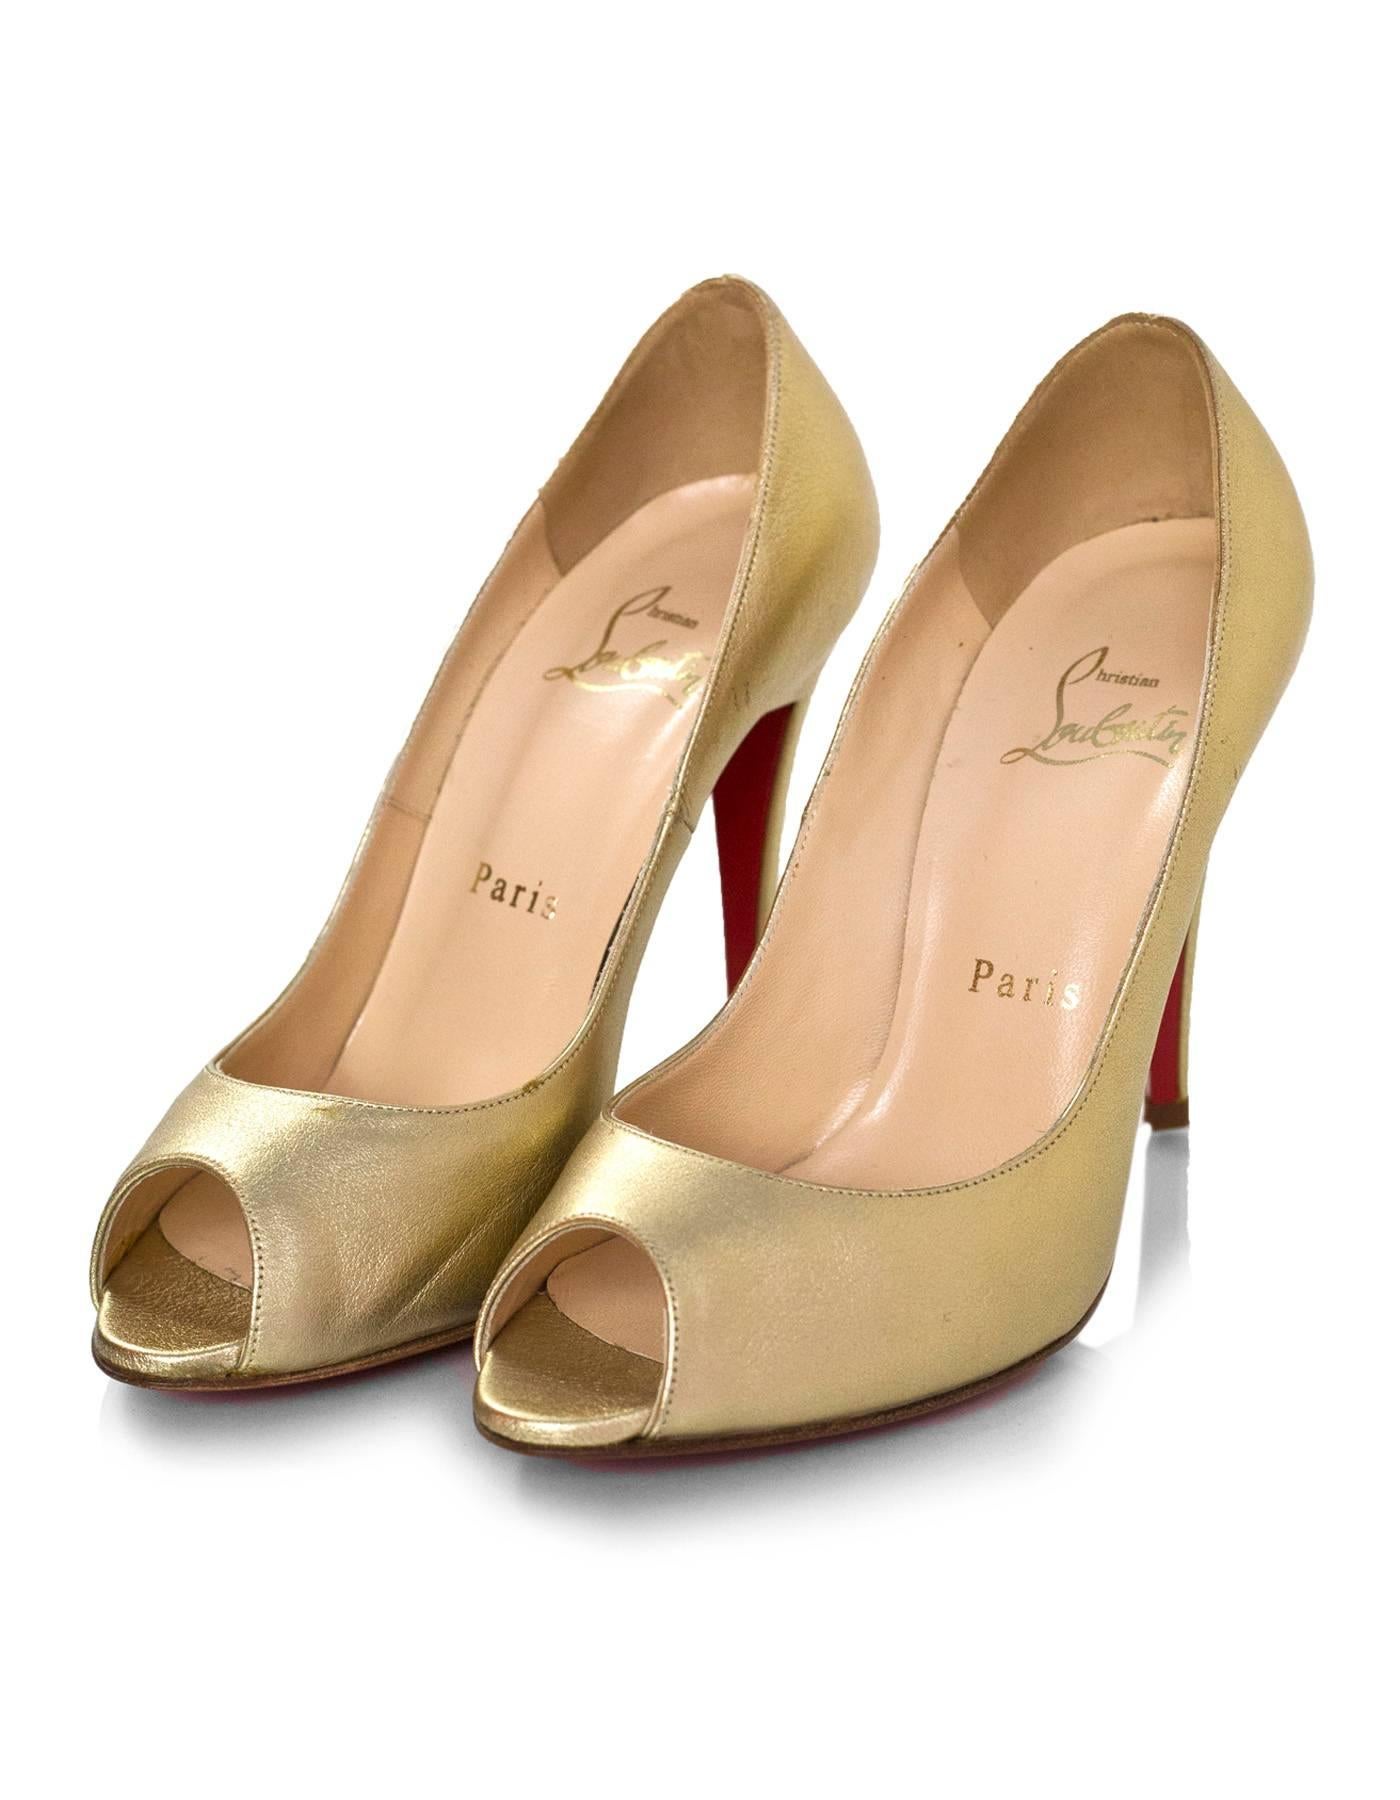 Christian Louboutin Gold Altadamia 100 Peep-Toe Pumps Sz 35.5 NEW

Made In: Italy
Color: Gold
Materials: Leather
Closure/Opening: Slide on
Sole Stamp: Christian Louboutin Made in Italy 35.5
Overall Condition: Excellent pre-owned condition -